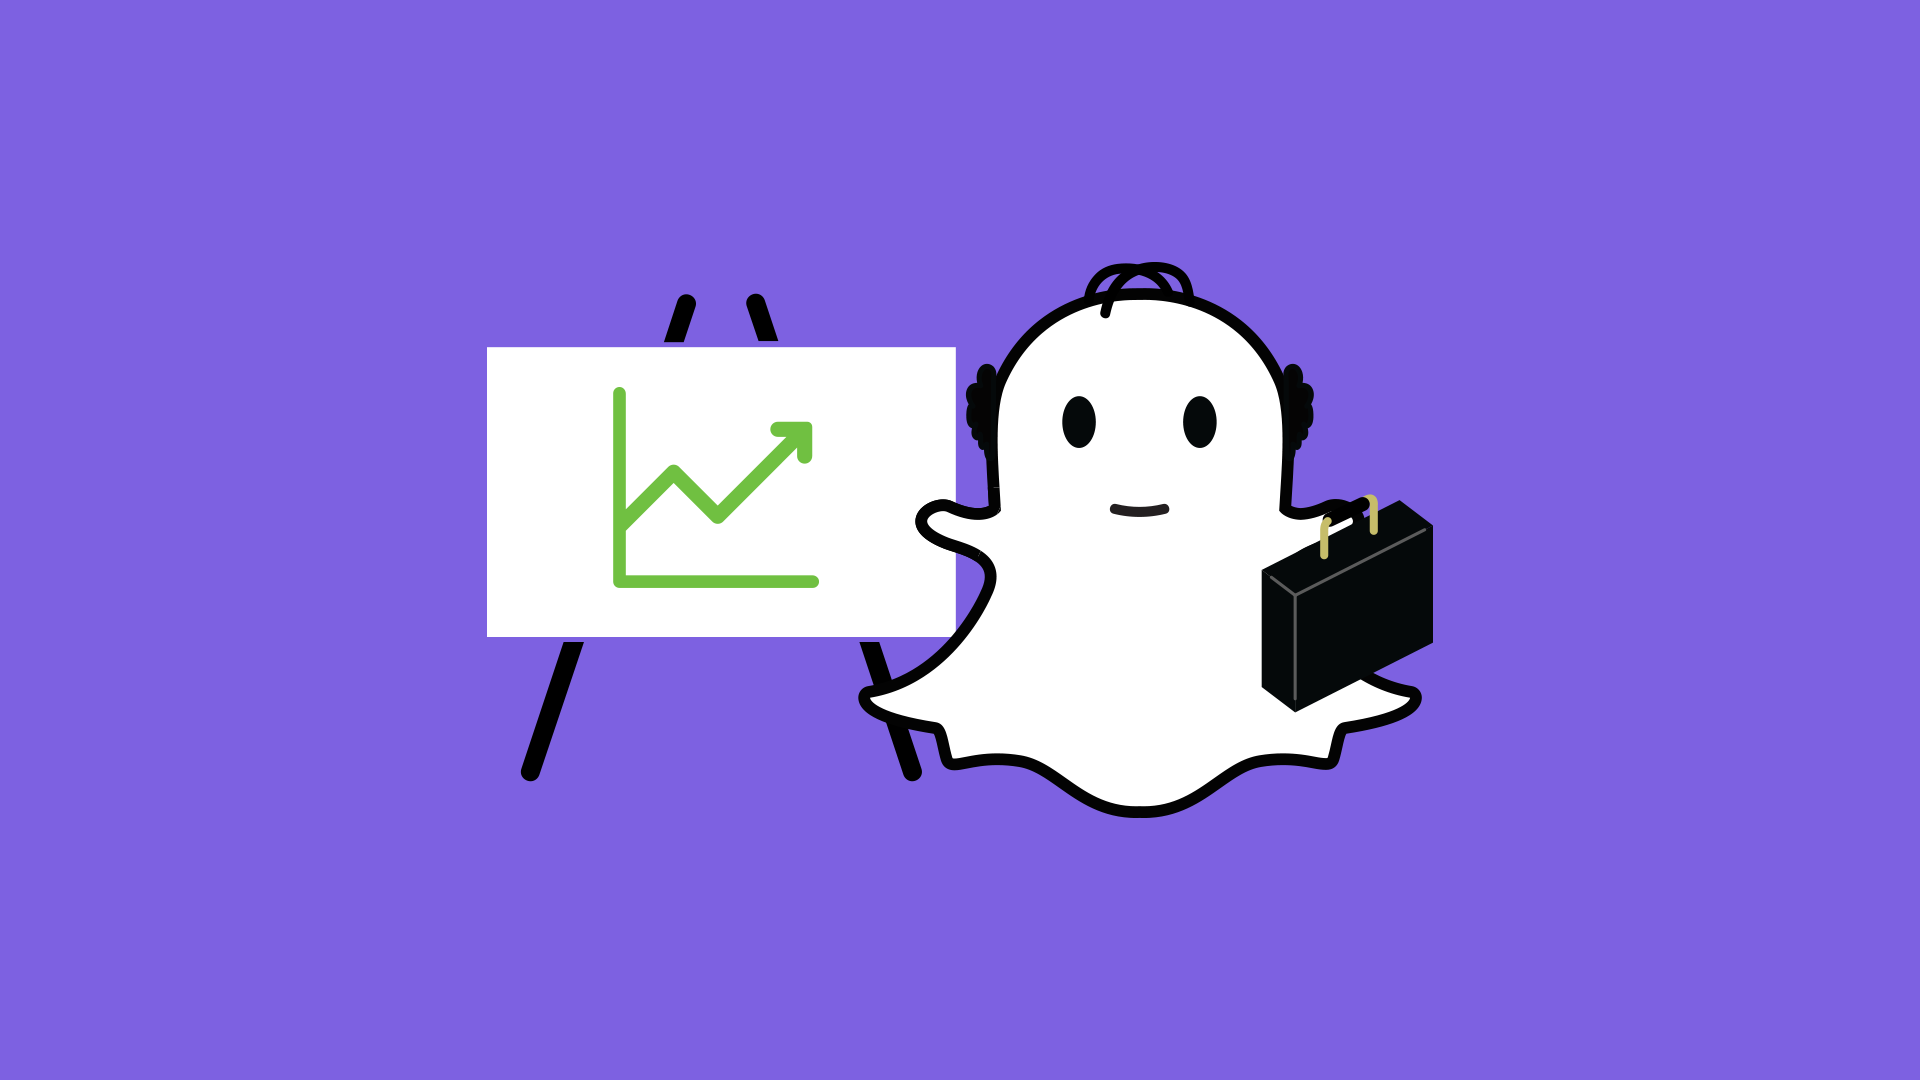 Snap ghost logo next to a stock chart